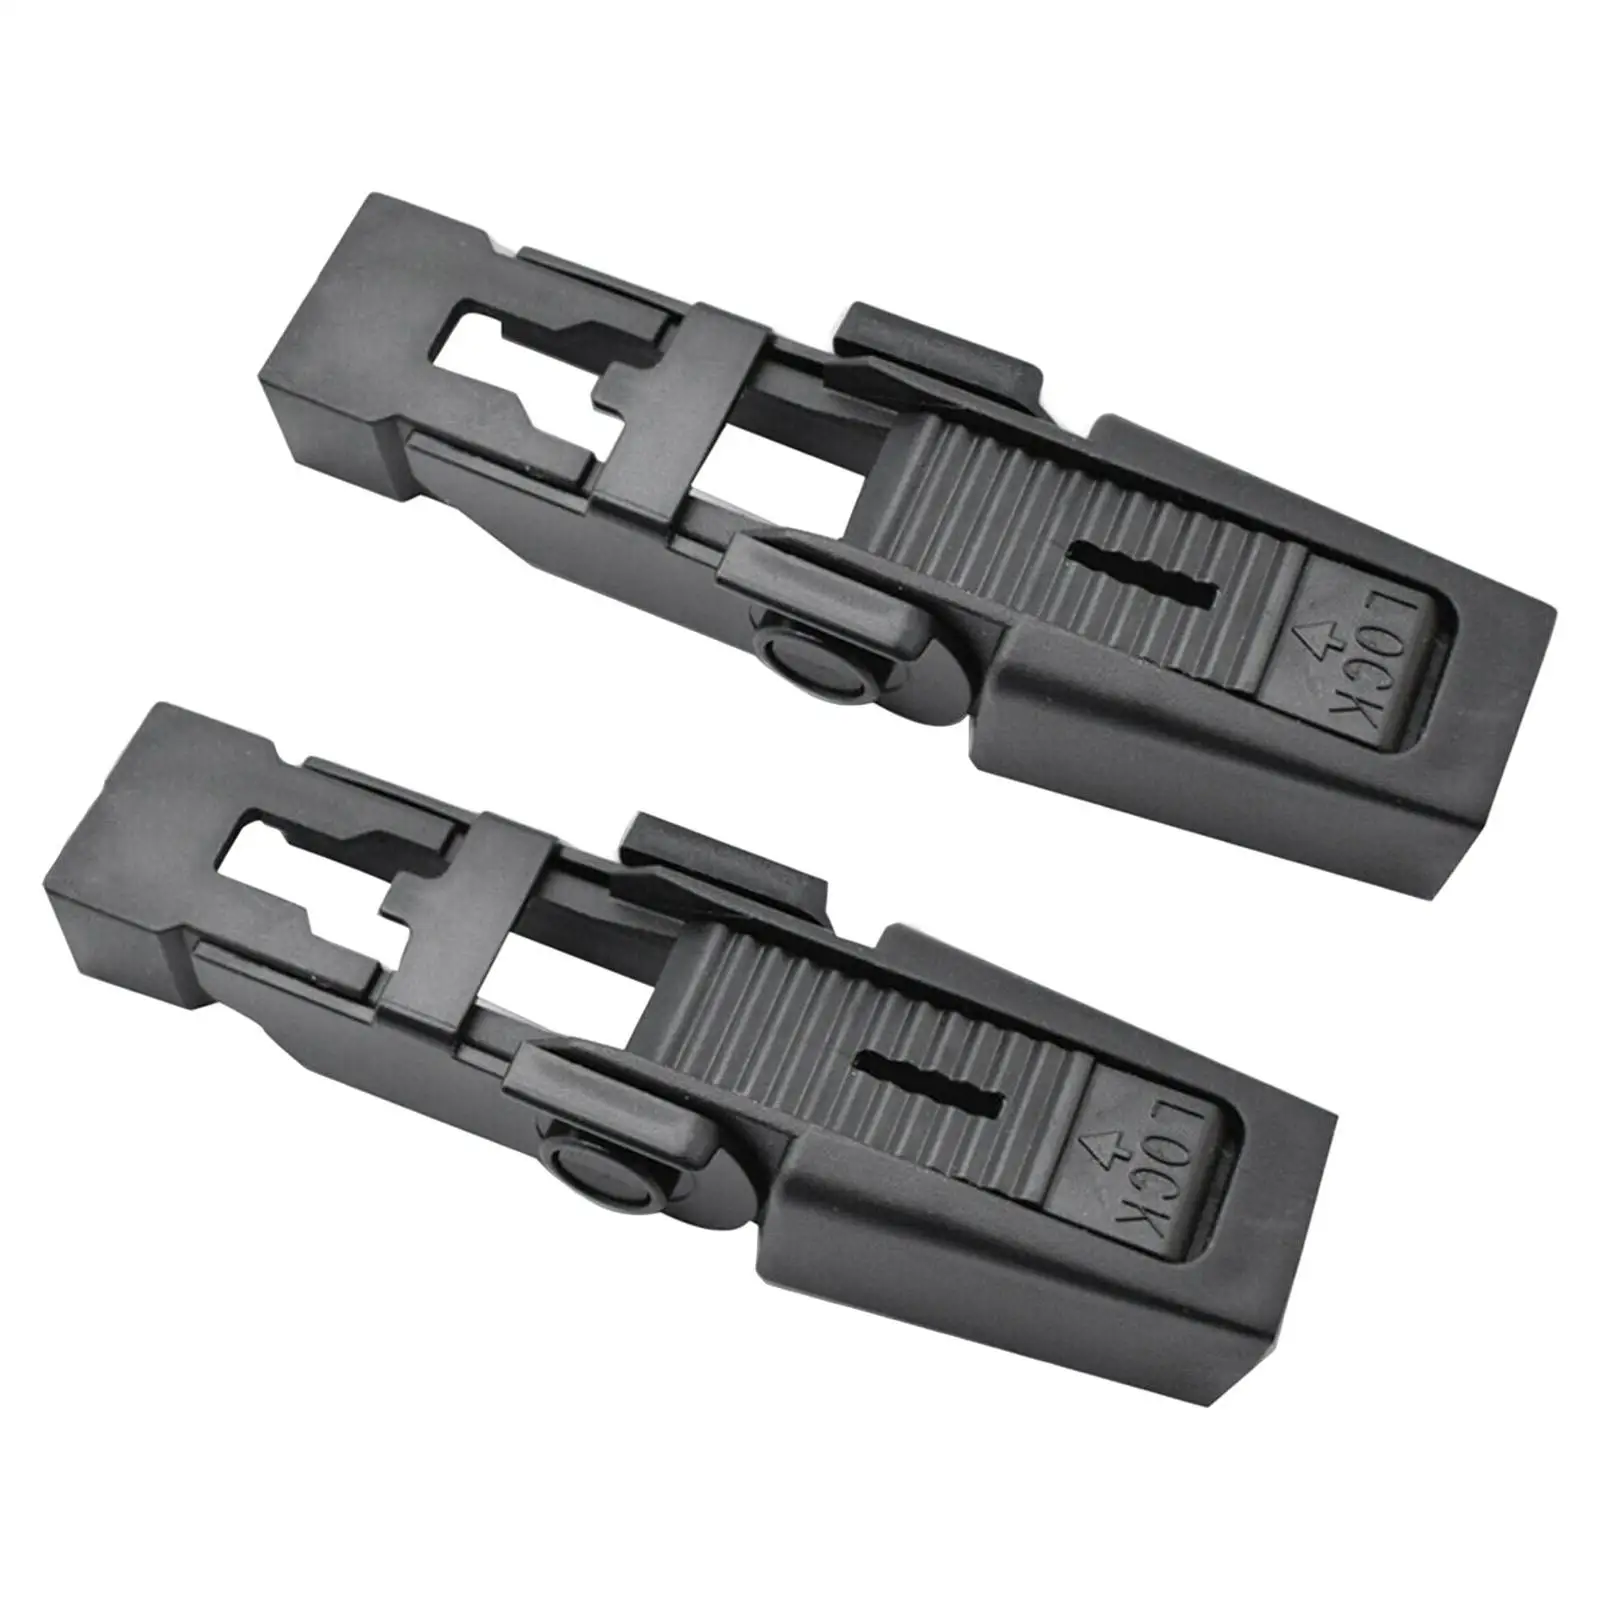 2x Auto Front Wiper Clip, Dkw100020 Black for Discovery 2 L322 Accessories High Quality.